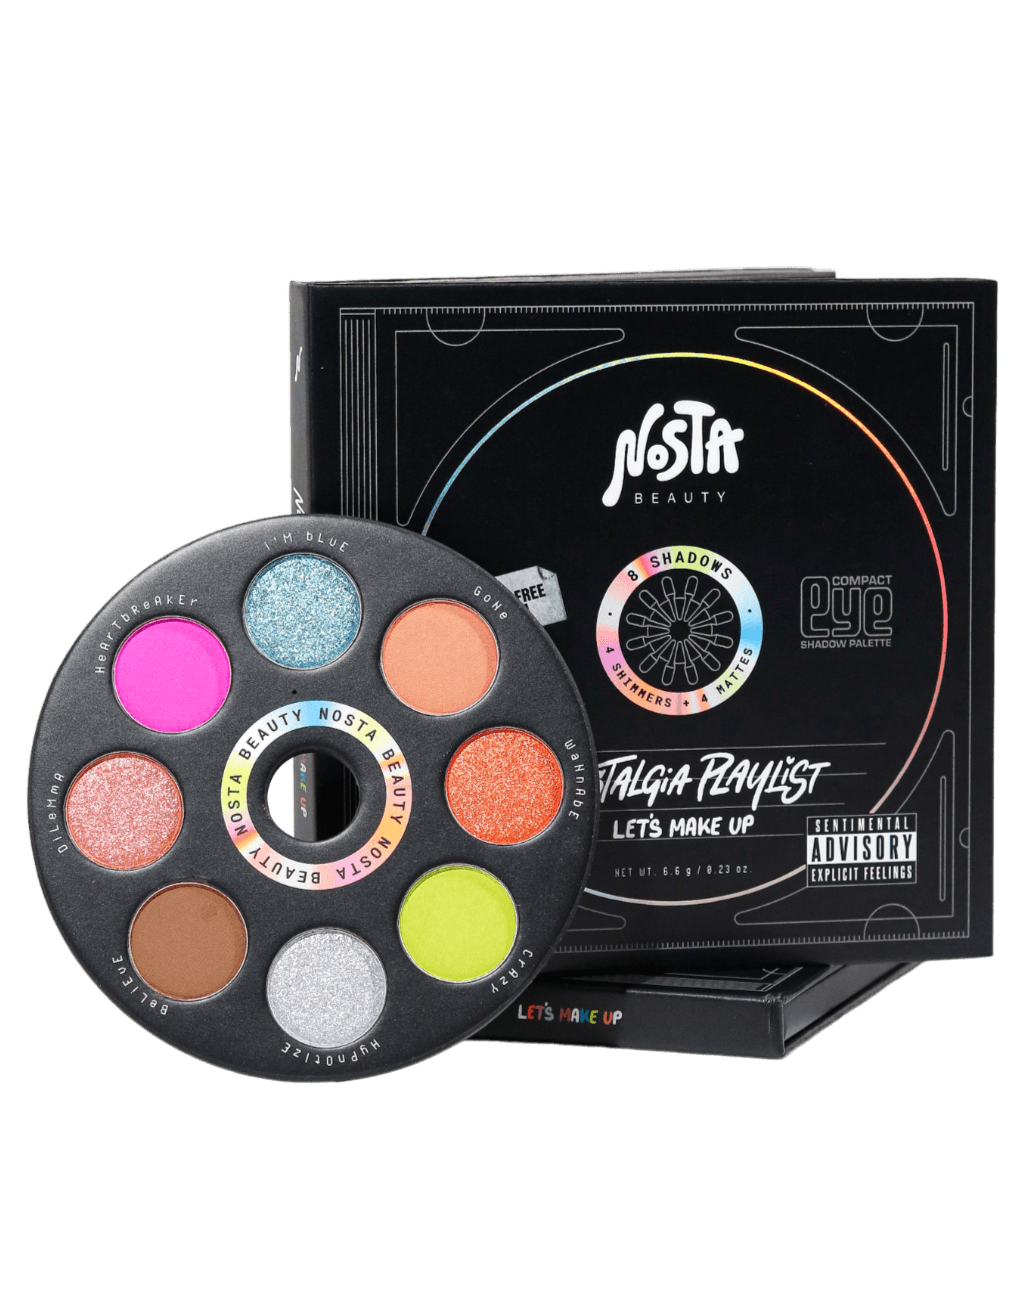 Nosta Beauty&#39;s talc free and organic cd eyeshadow palette. This 8-shade palette has 4 shimmer and 4 mattes with album-like packaging.